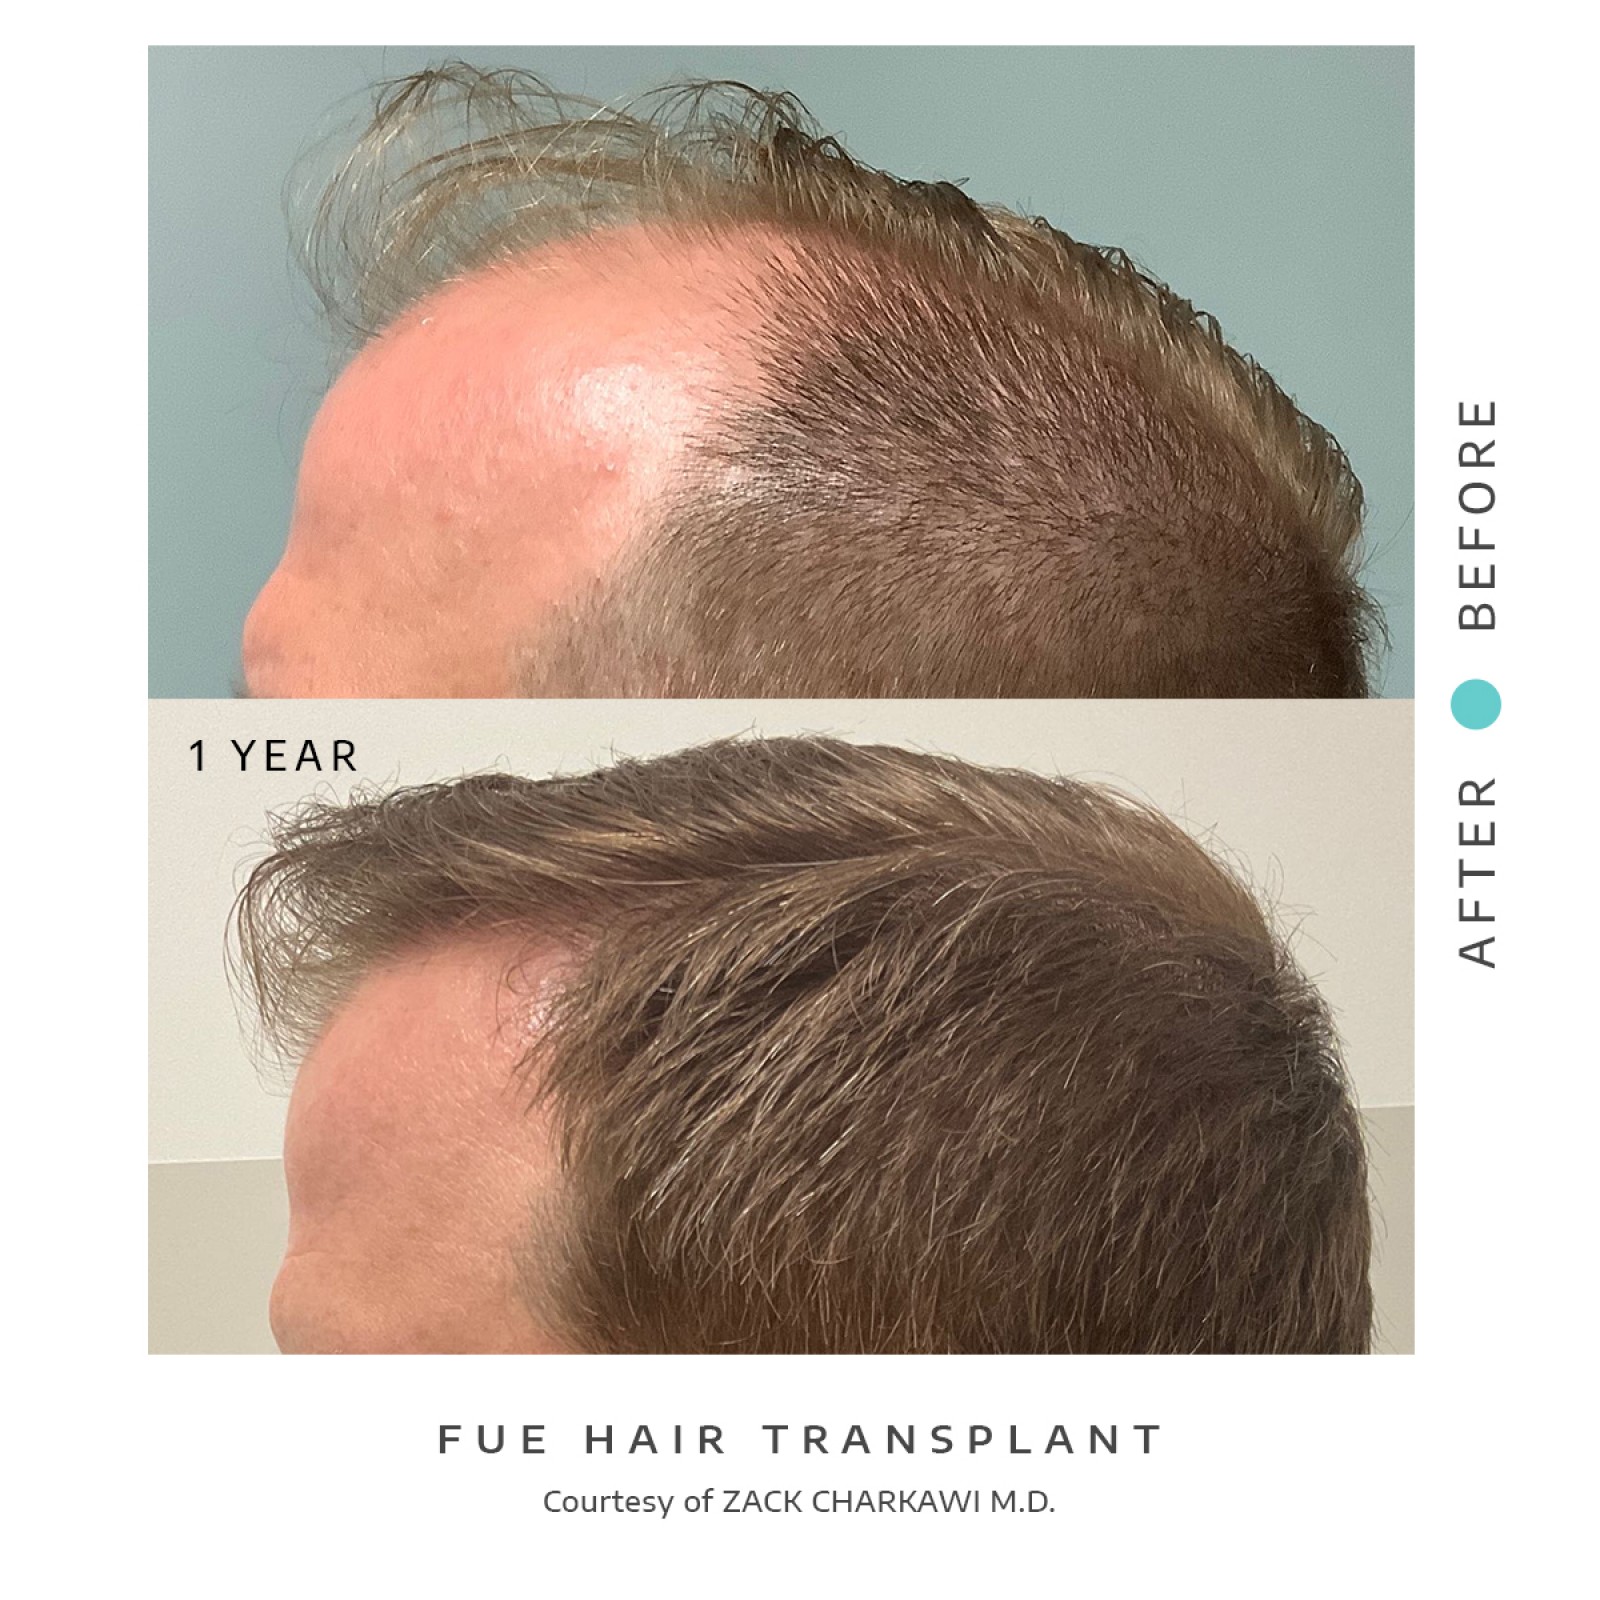 The before image depicts balding and thinning hair with visible scalp patches. The after image illustrates a successful hair transplant with the scalp now covered in dense, natural-looking hair.